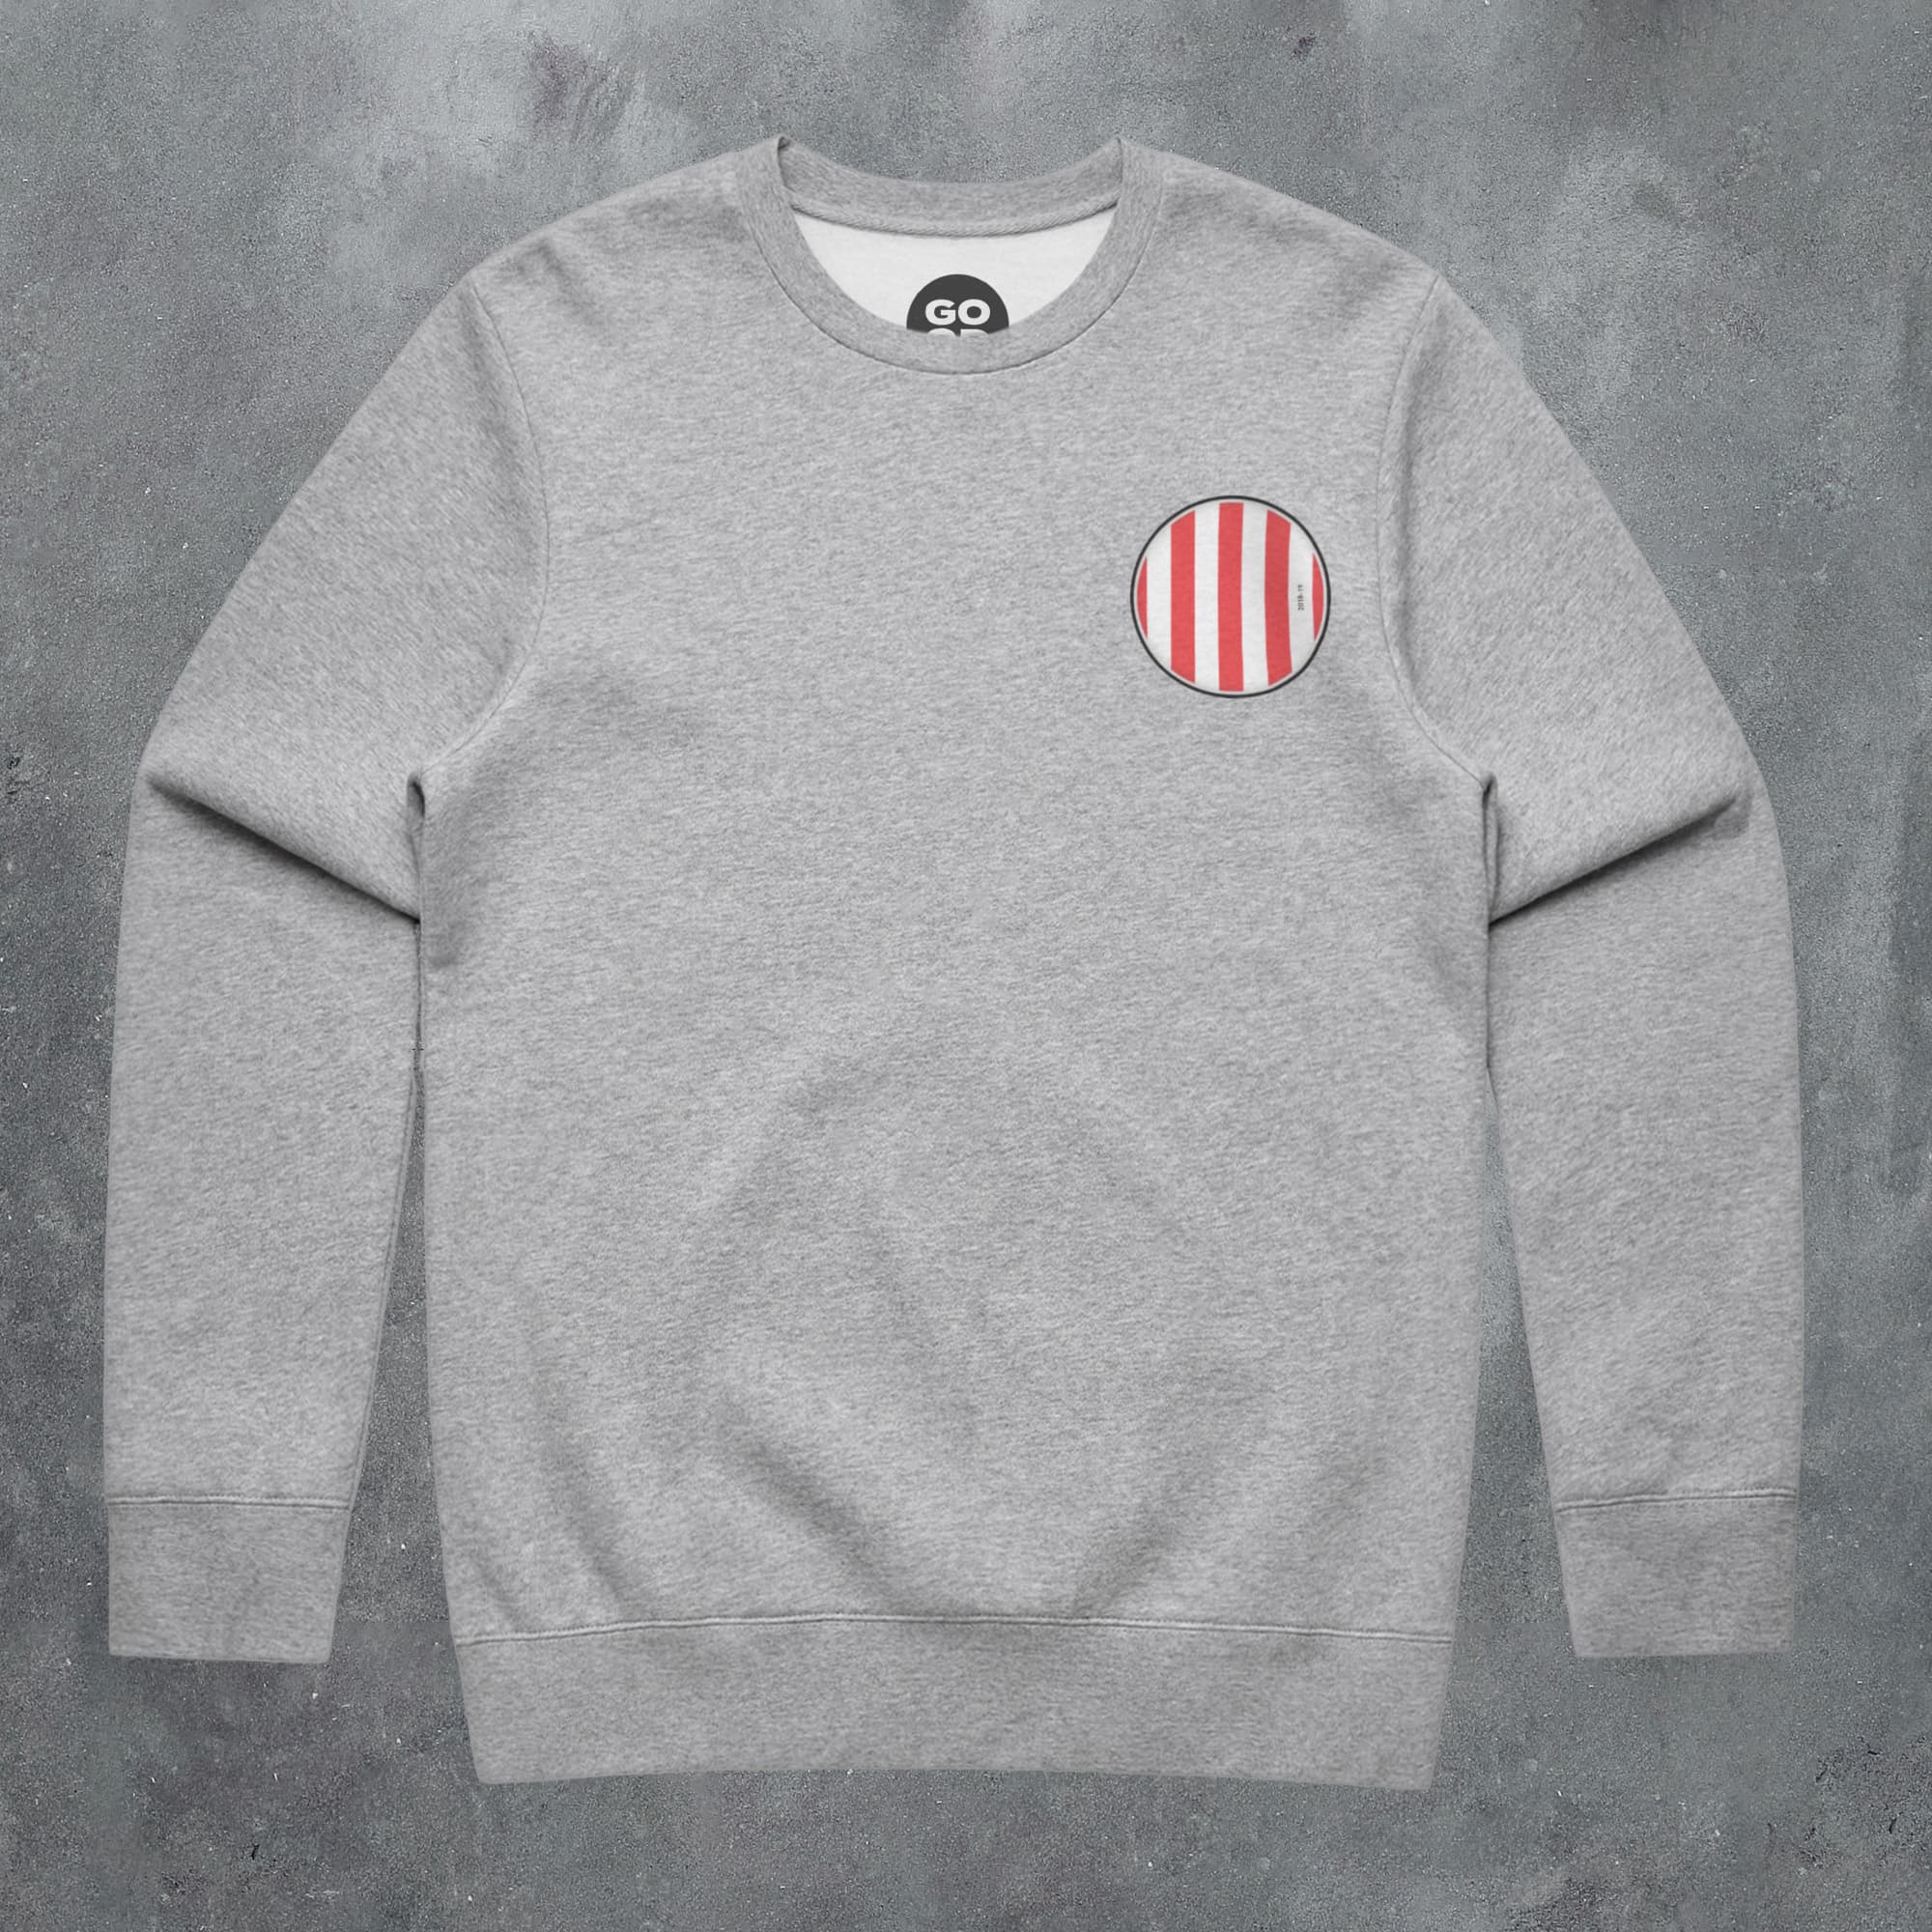 a grey sweatshirt with red and white stripes on it